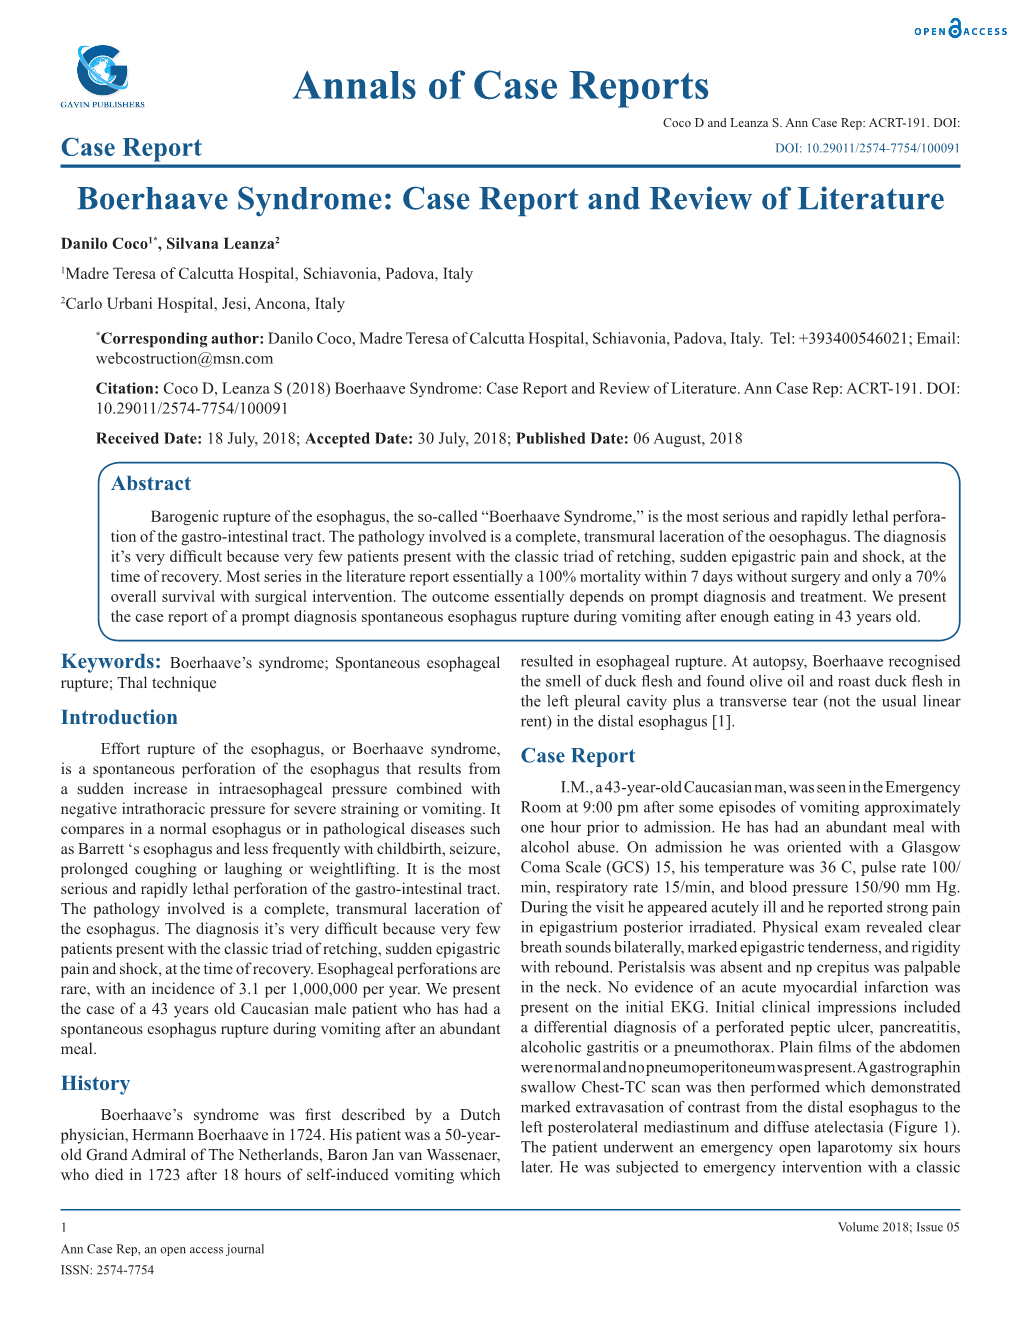 Boerhaave Syndrome: Case Report and Review of Literature